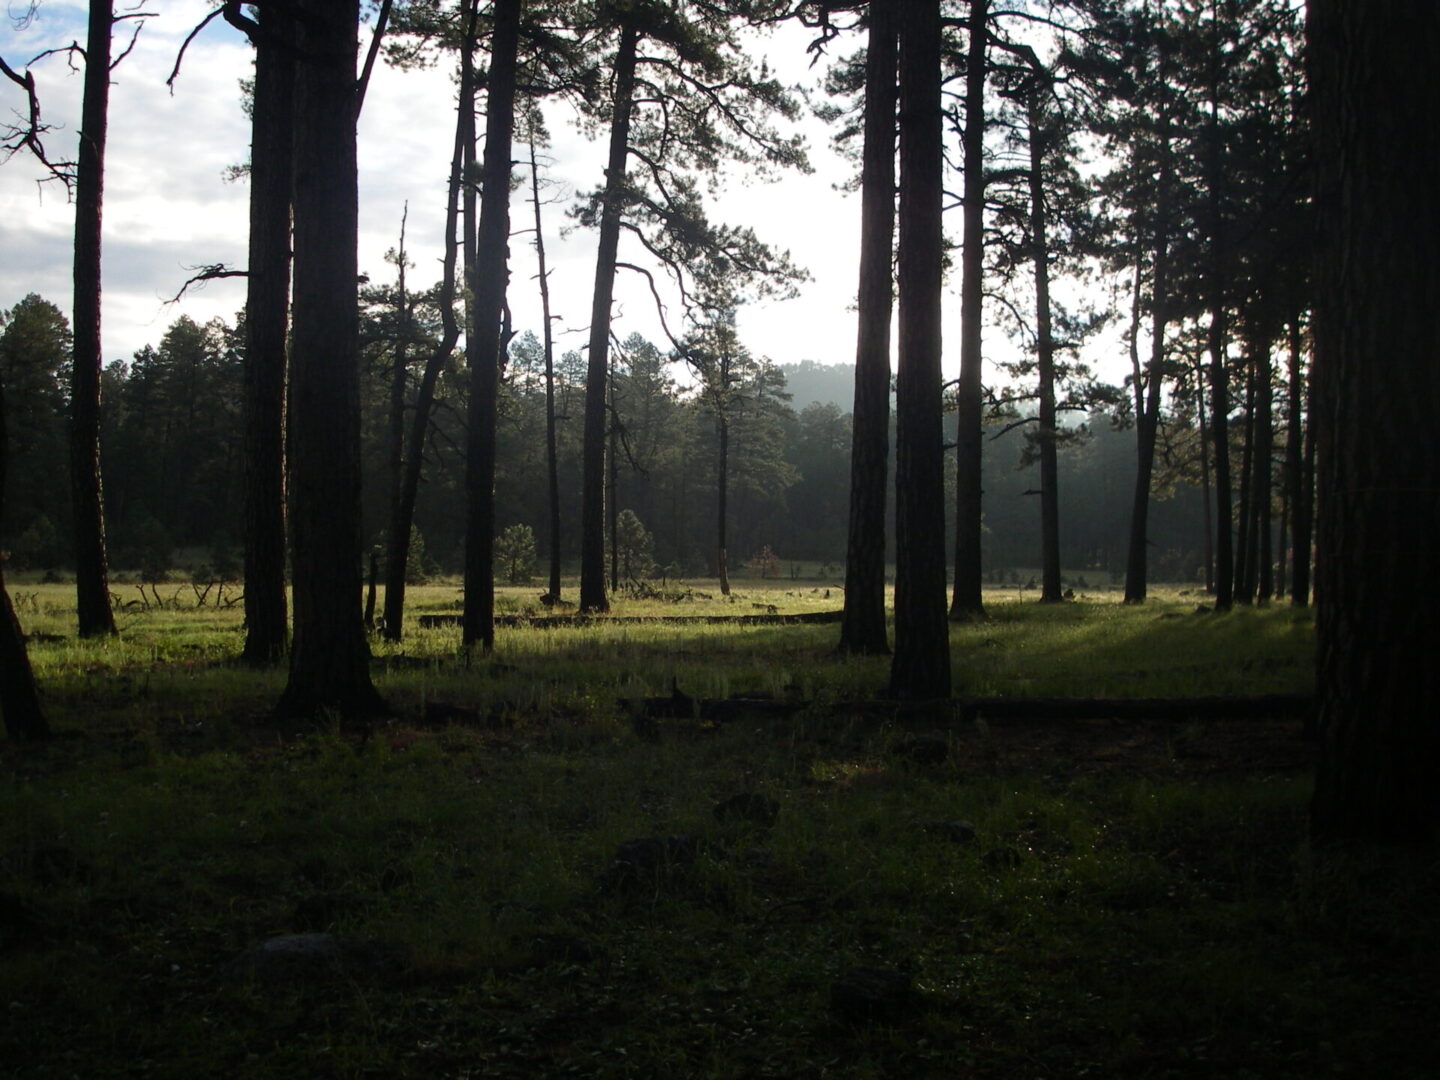 A forest with trees and grass in the foreground.